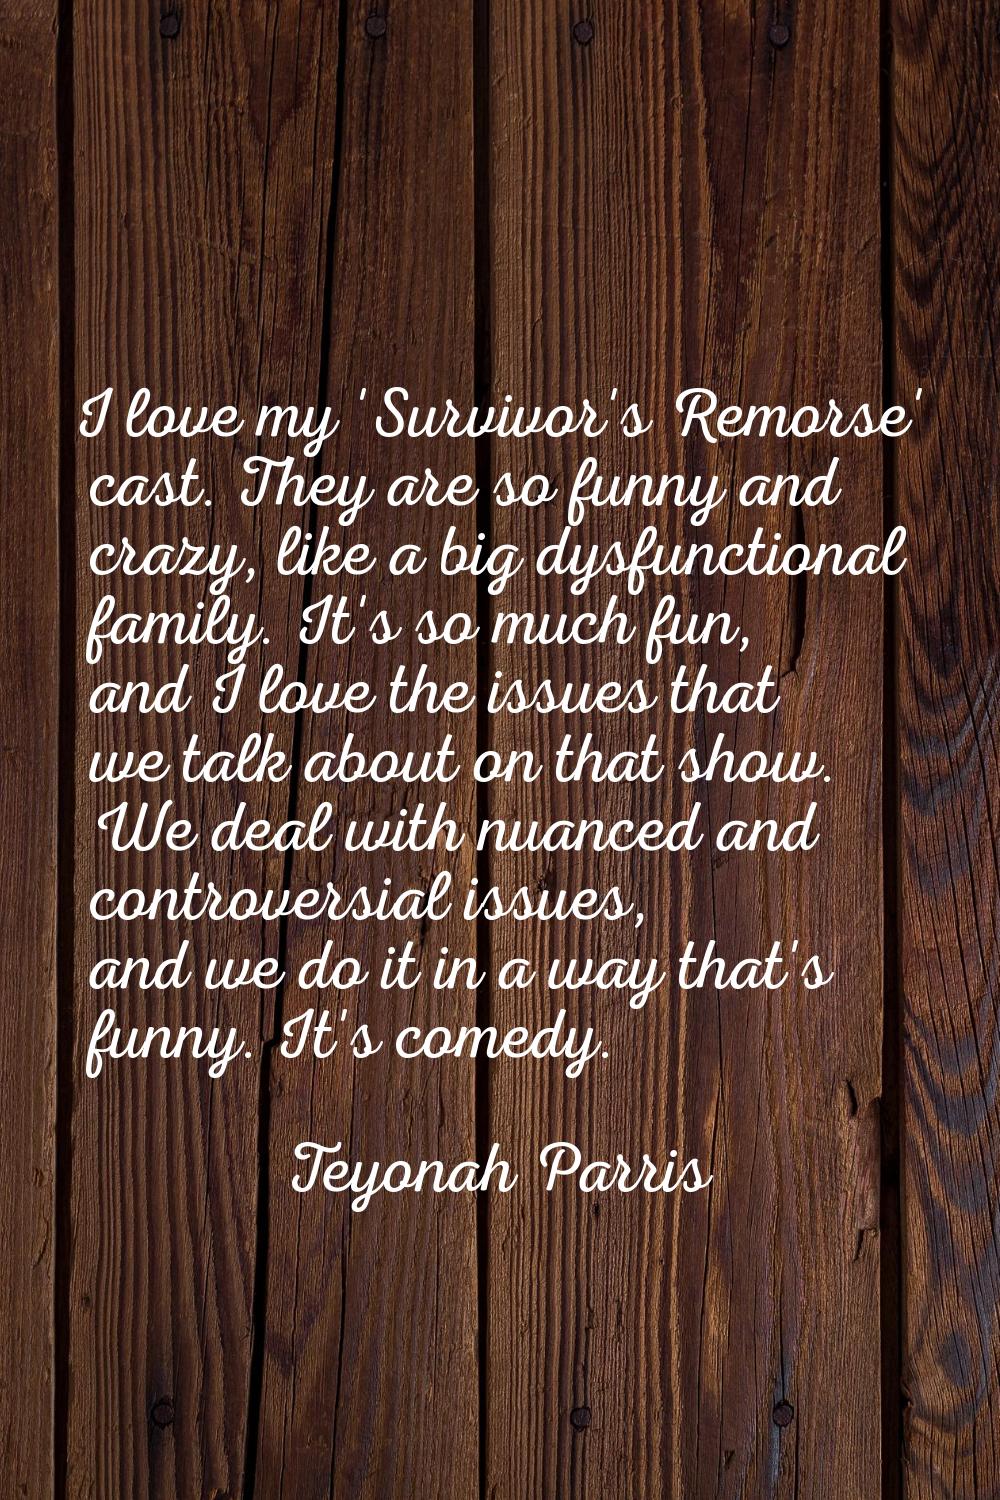 I love my 'Survivor's Remorse' cast. They are so funny and crazy, like a big dysfunctional family. 